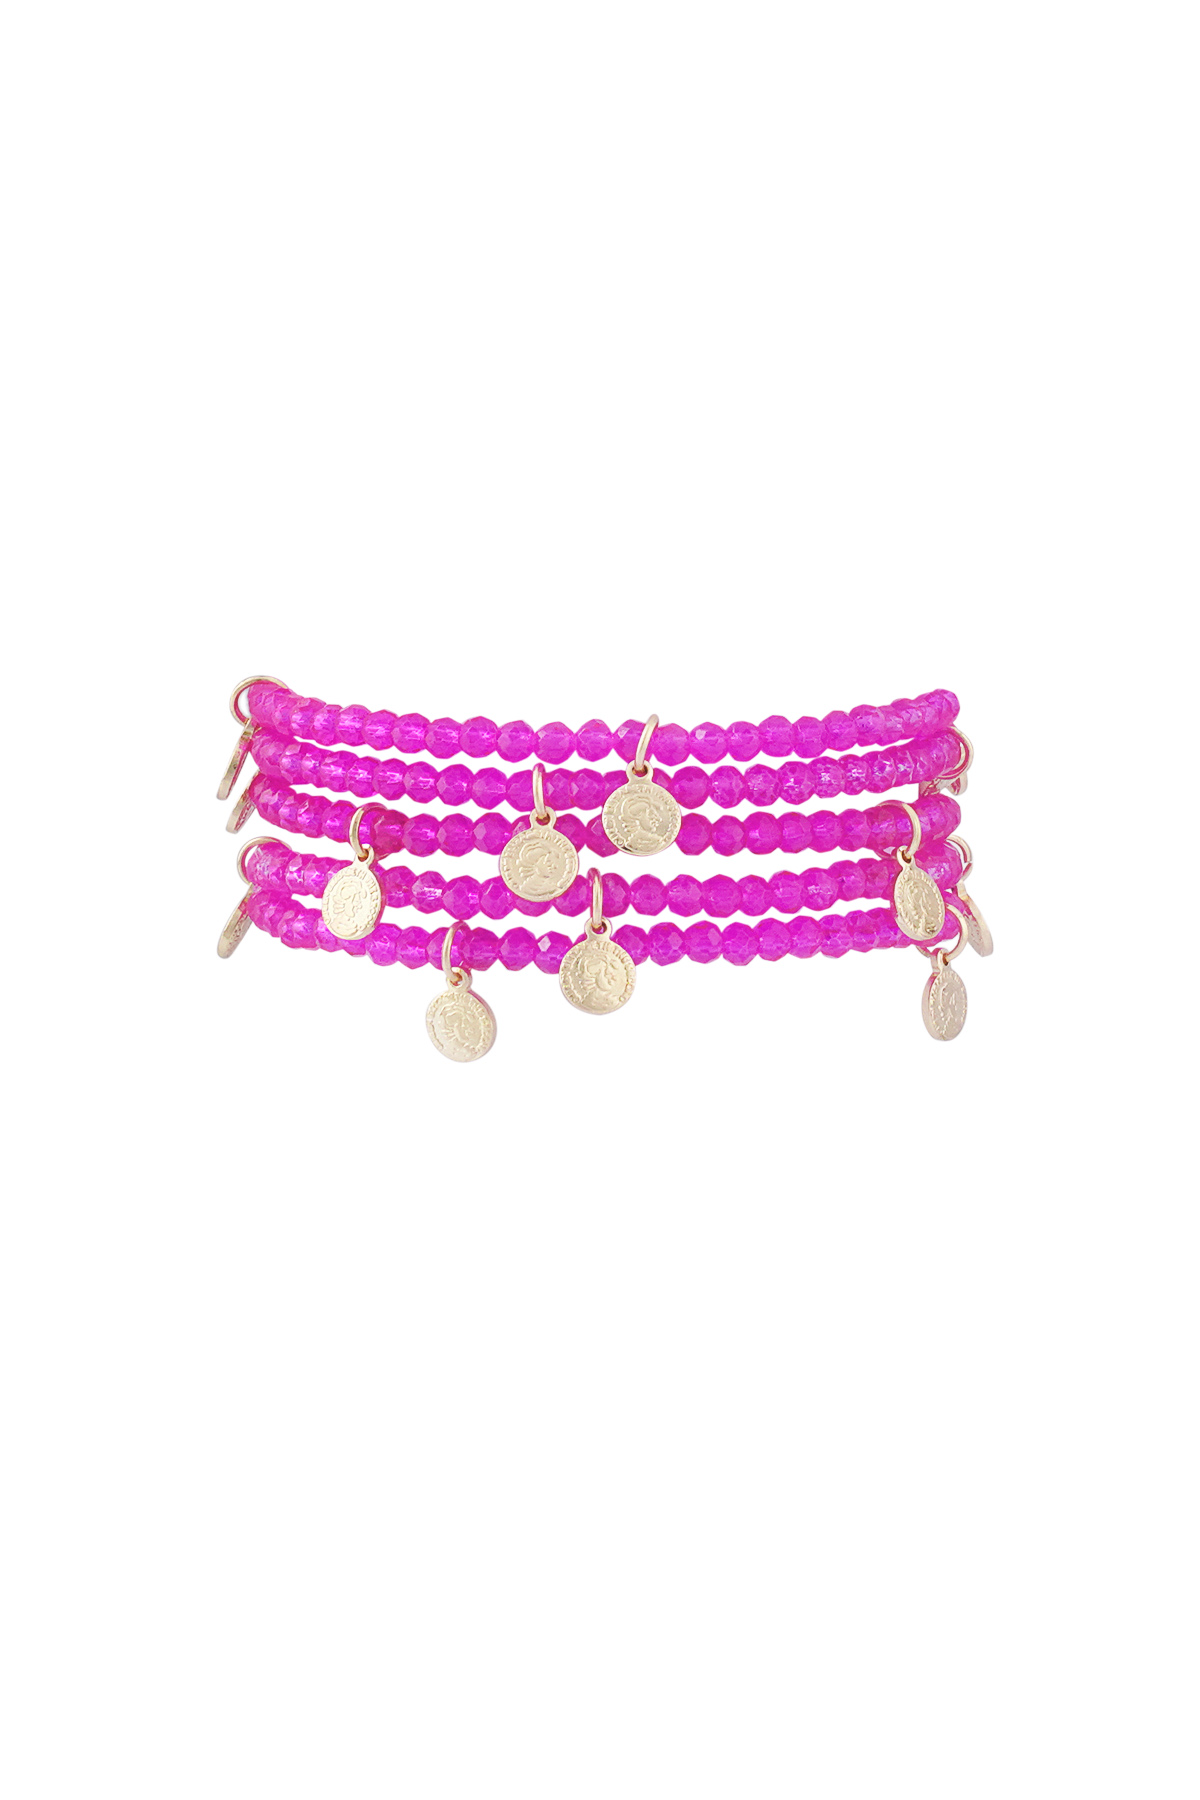 Bracelets with coin charms - fuchsia